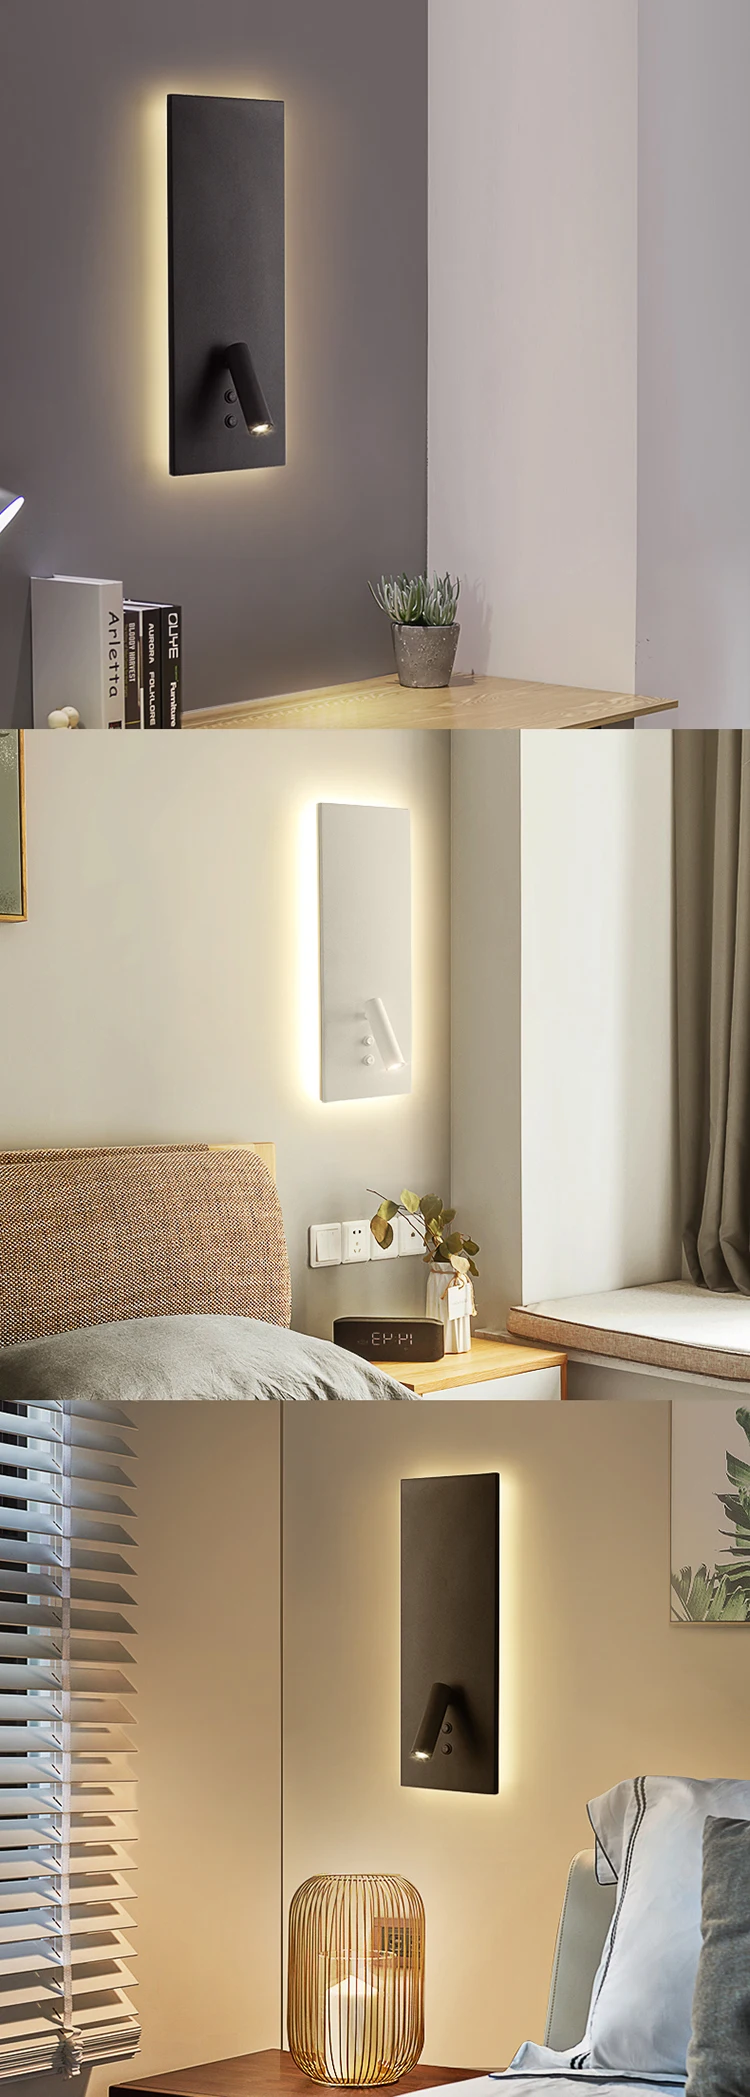 Modern bedroom adjustable rectangle aluminum bracket 3W LED reading wall light with switch